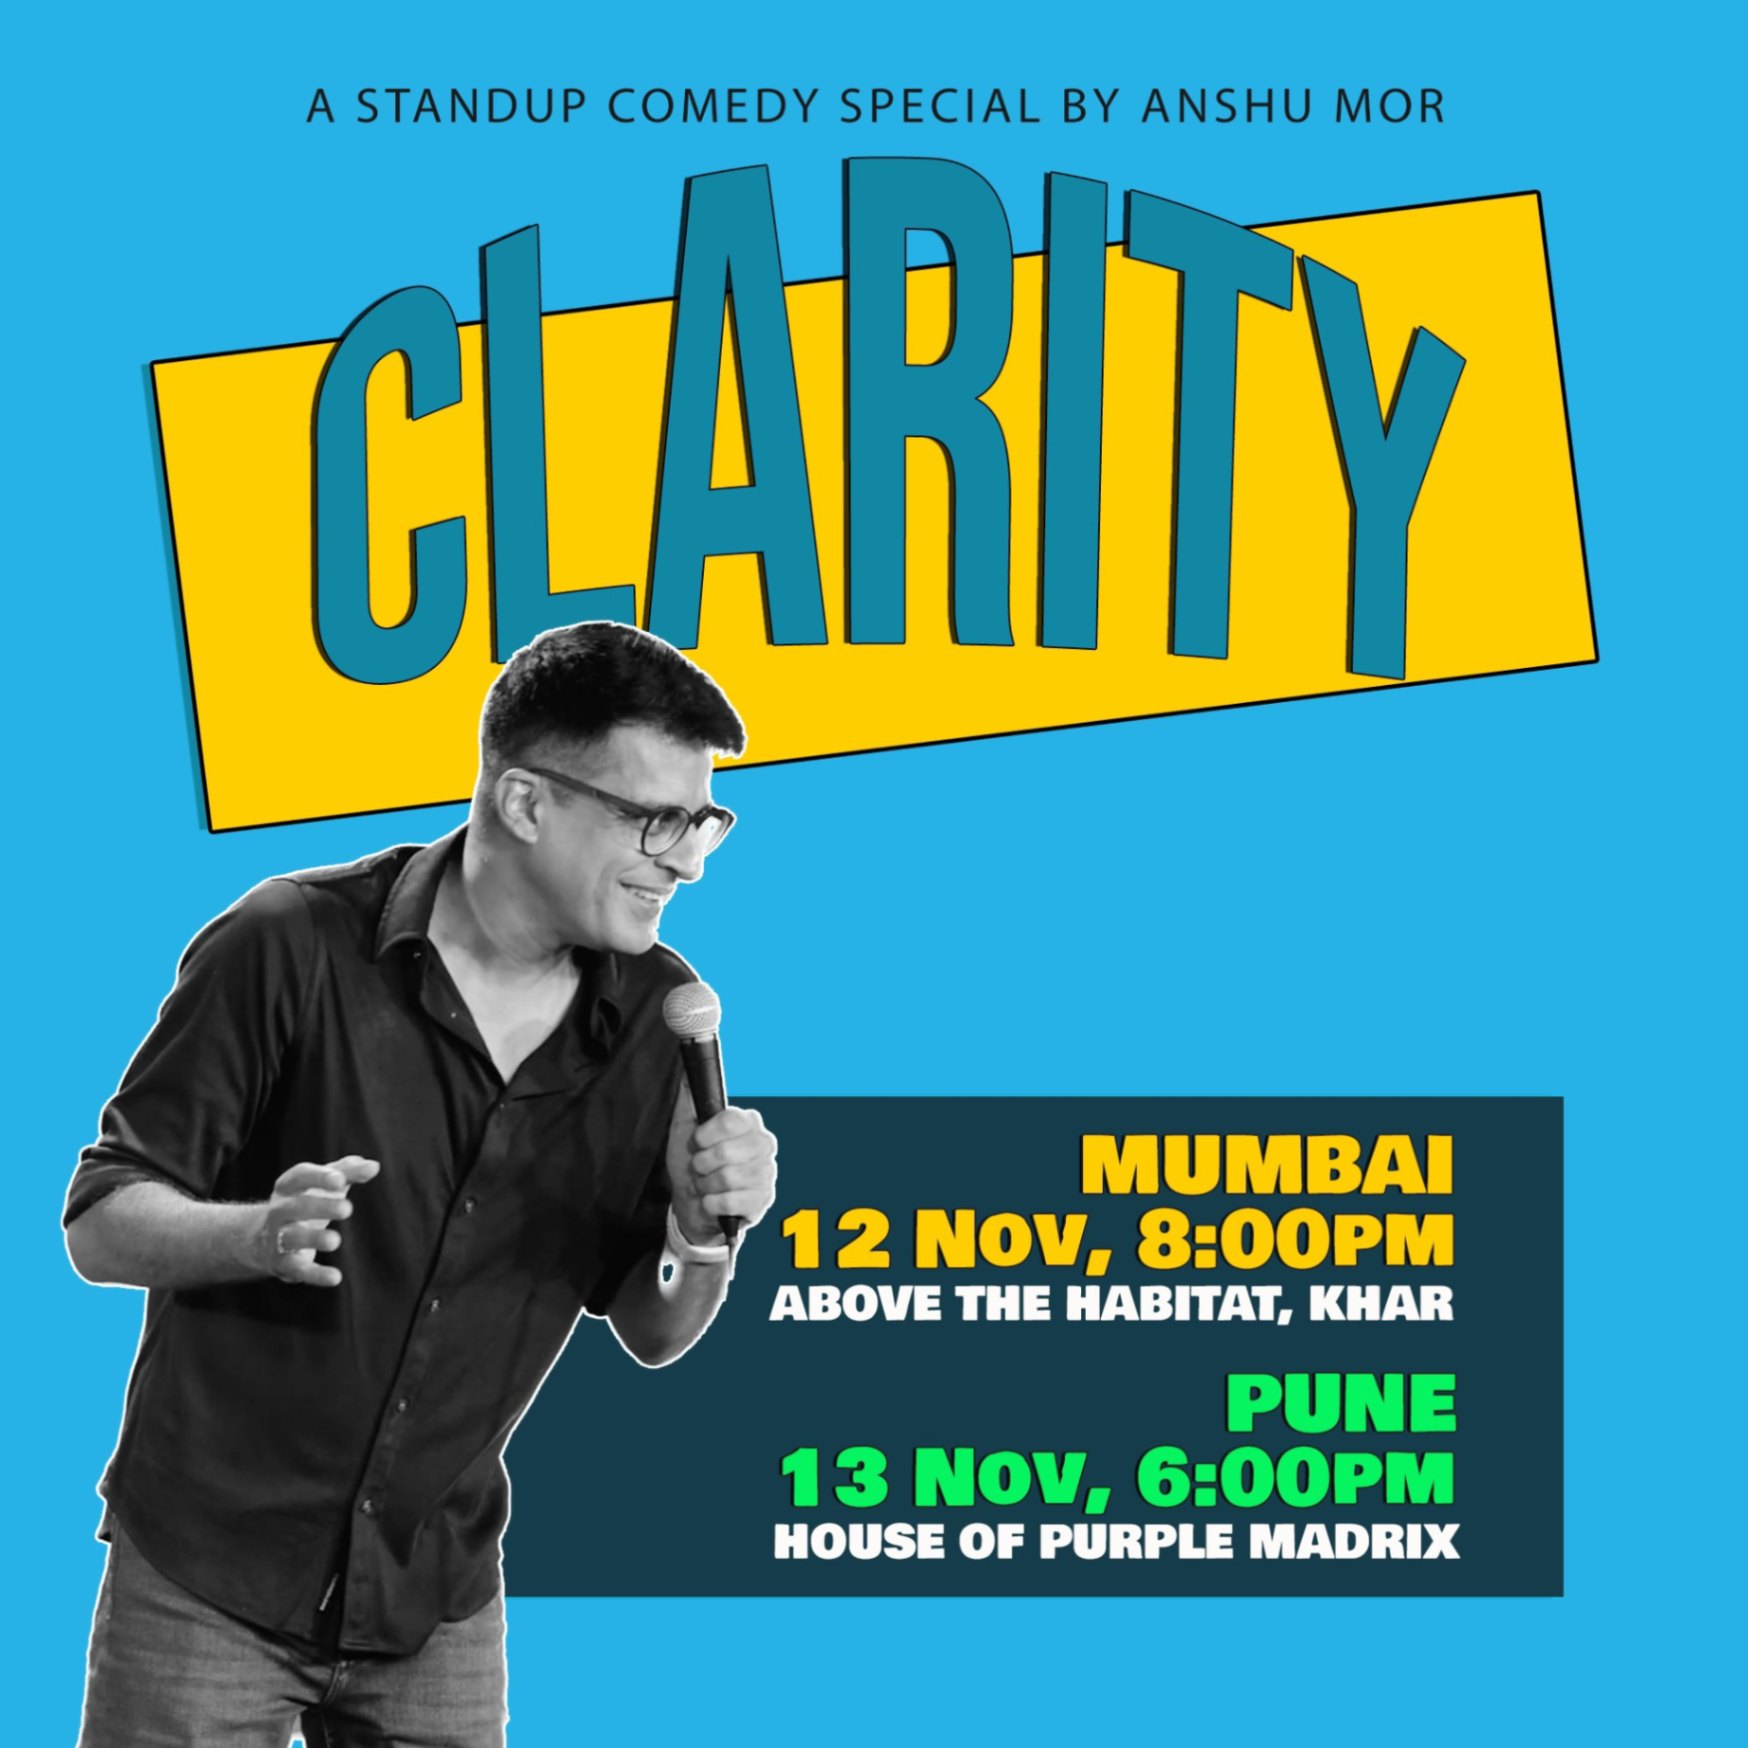 Stand Up Comedian Anshu Mor will be performing in Mumbai on Nov 12th